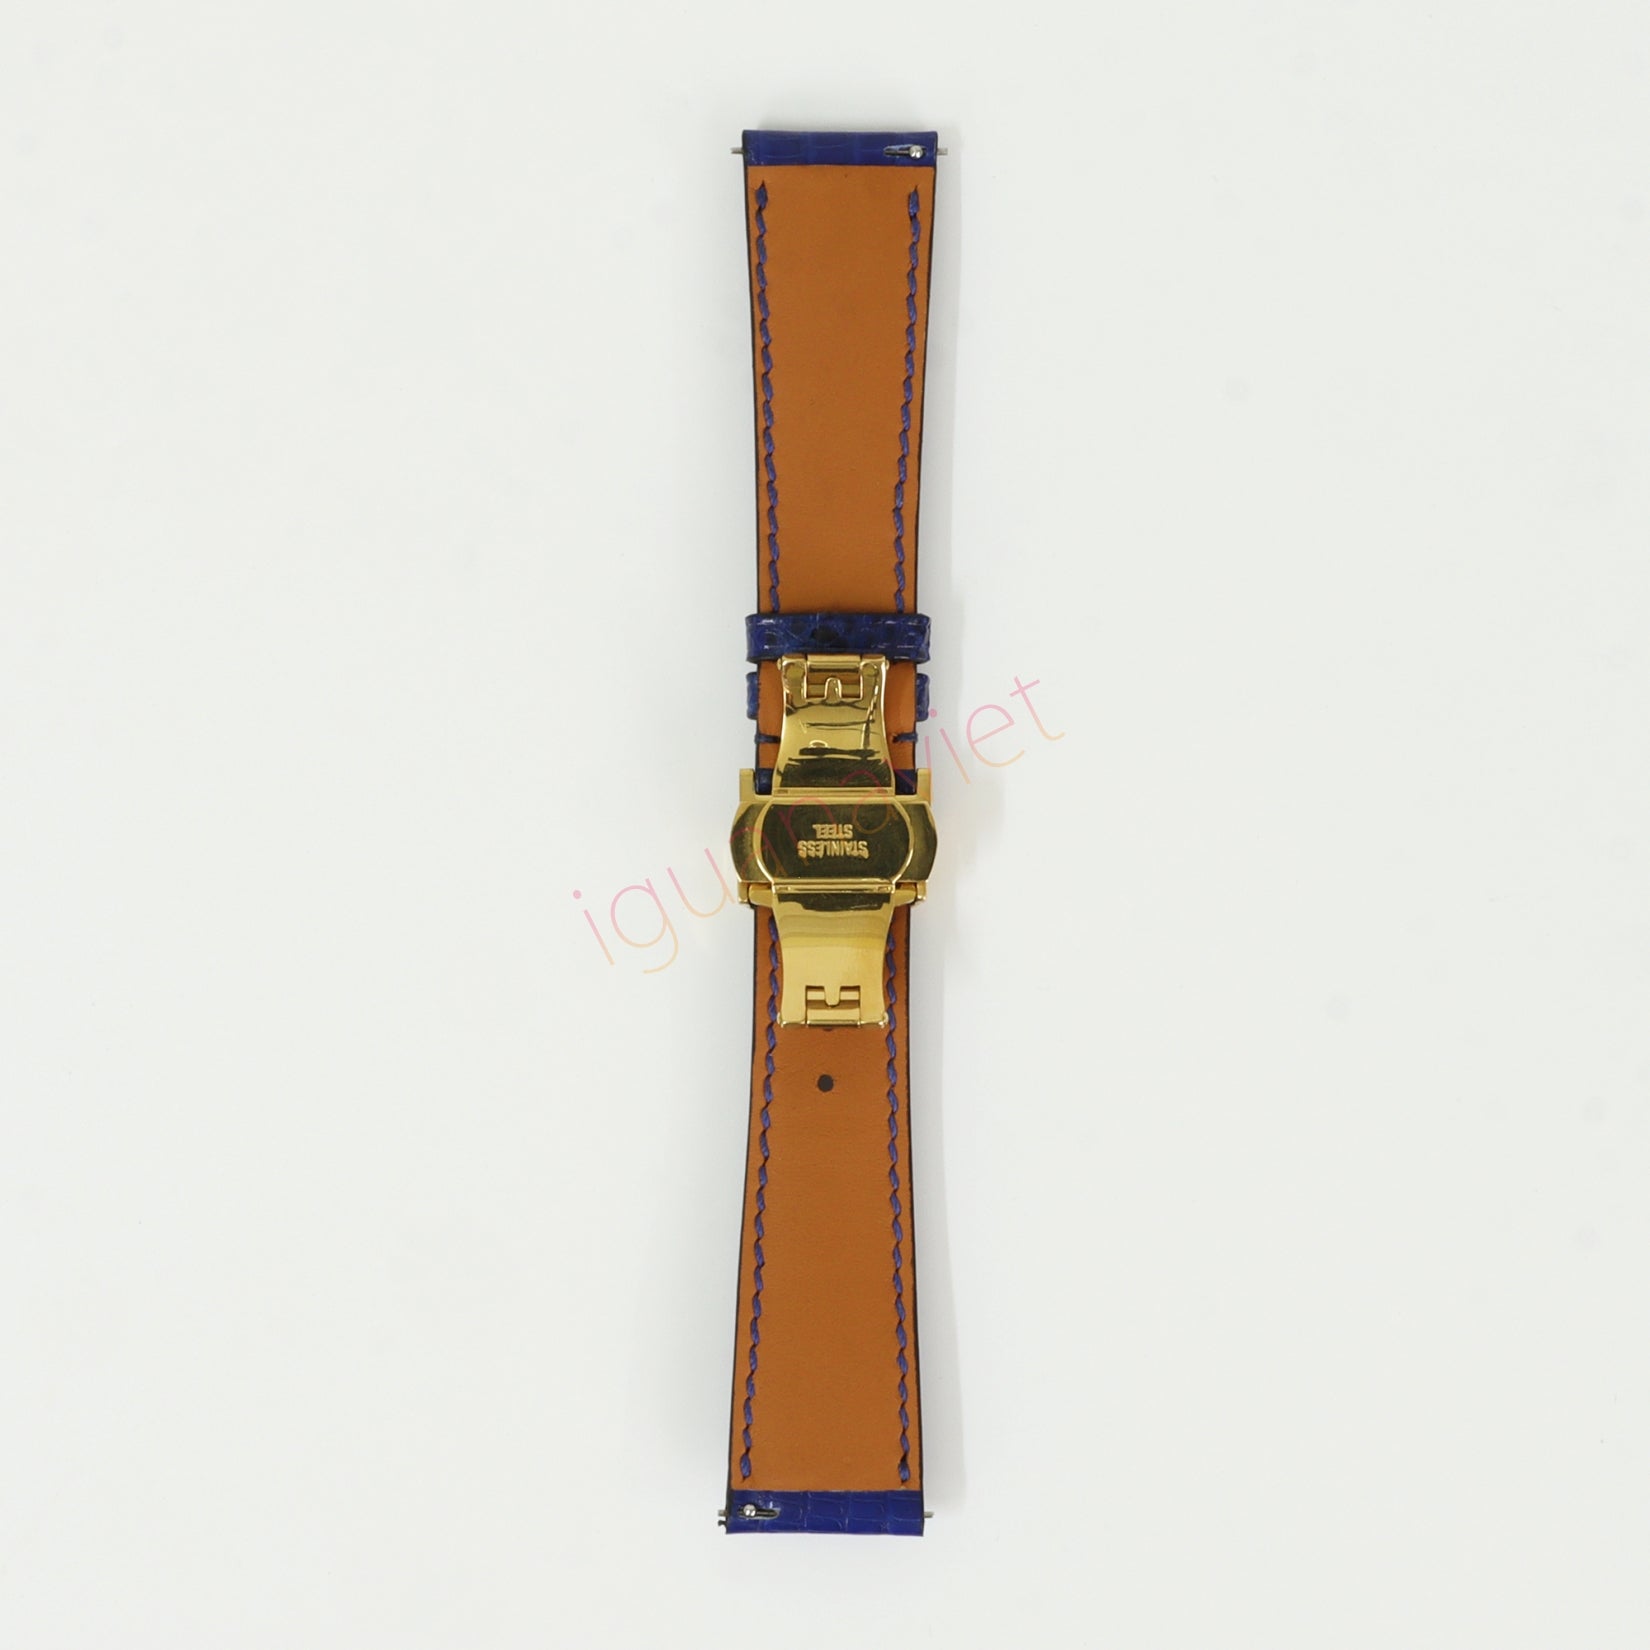 Blue Genuine iguana leather watch strap with deployment buckle, quick release pin leather watch strap, handmade leather watch strap